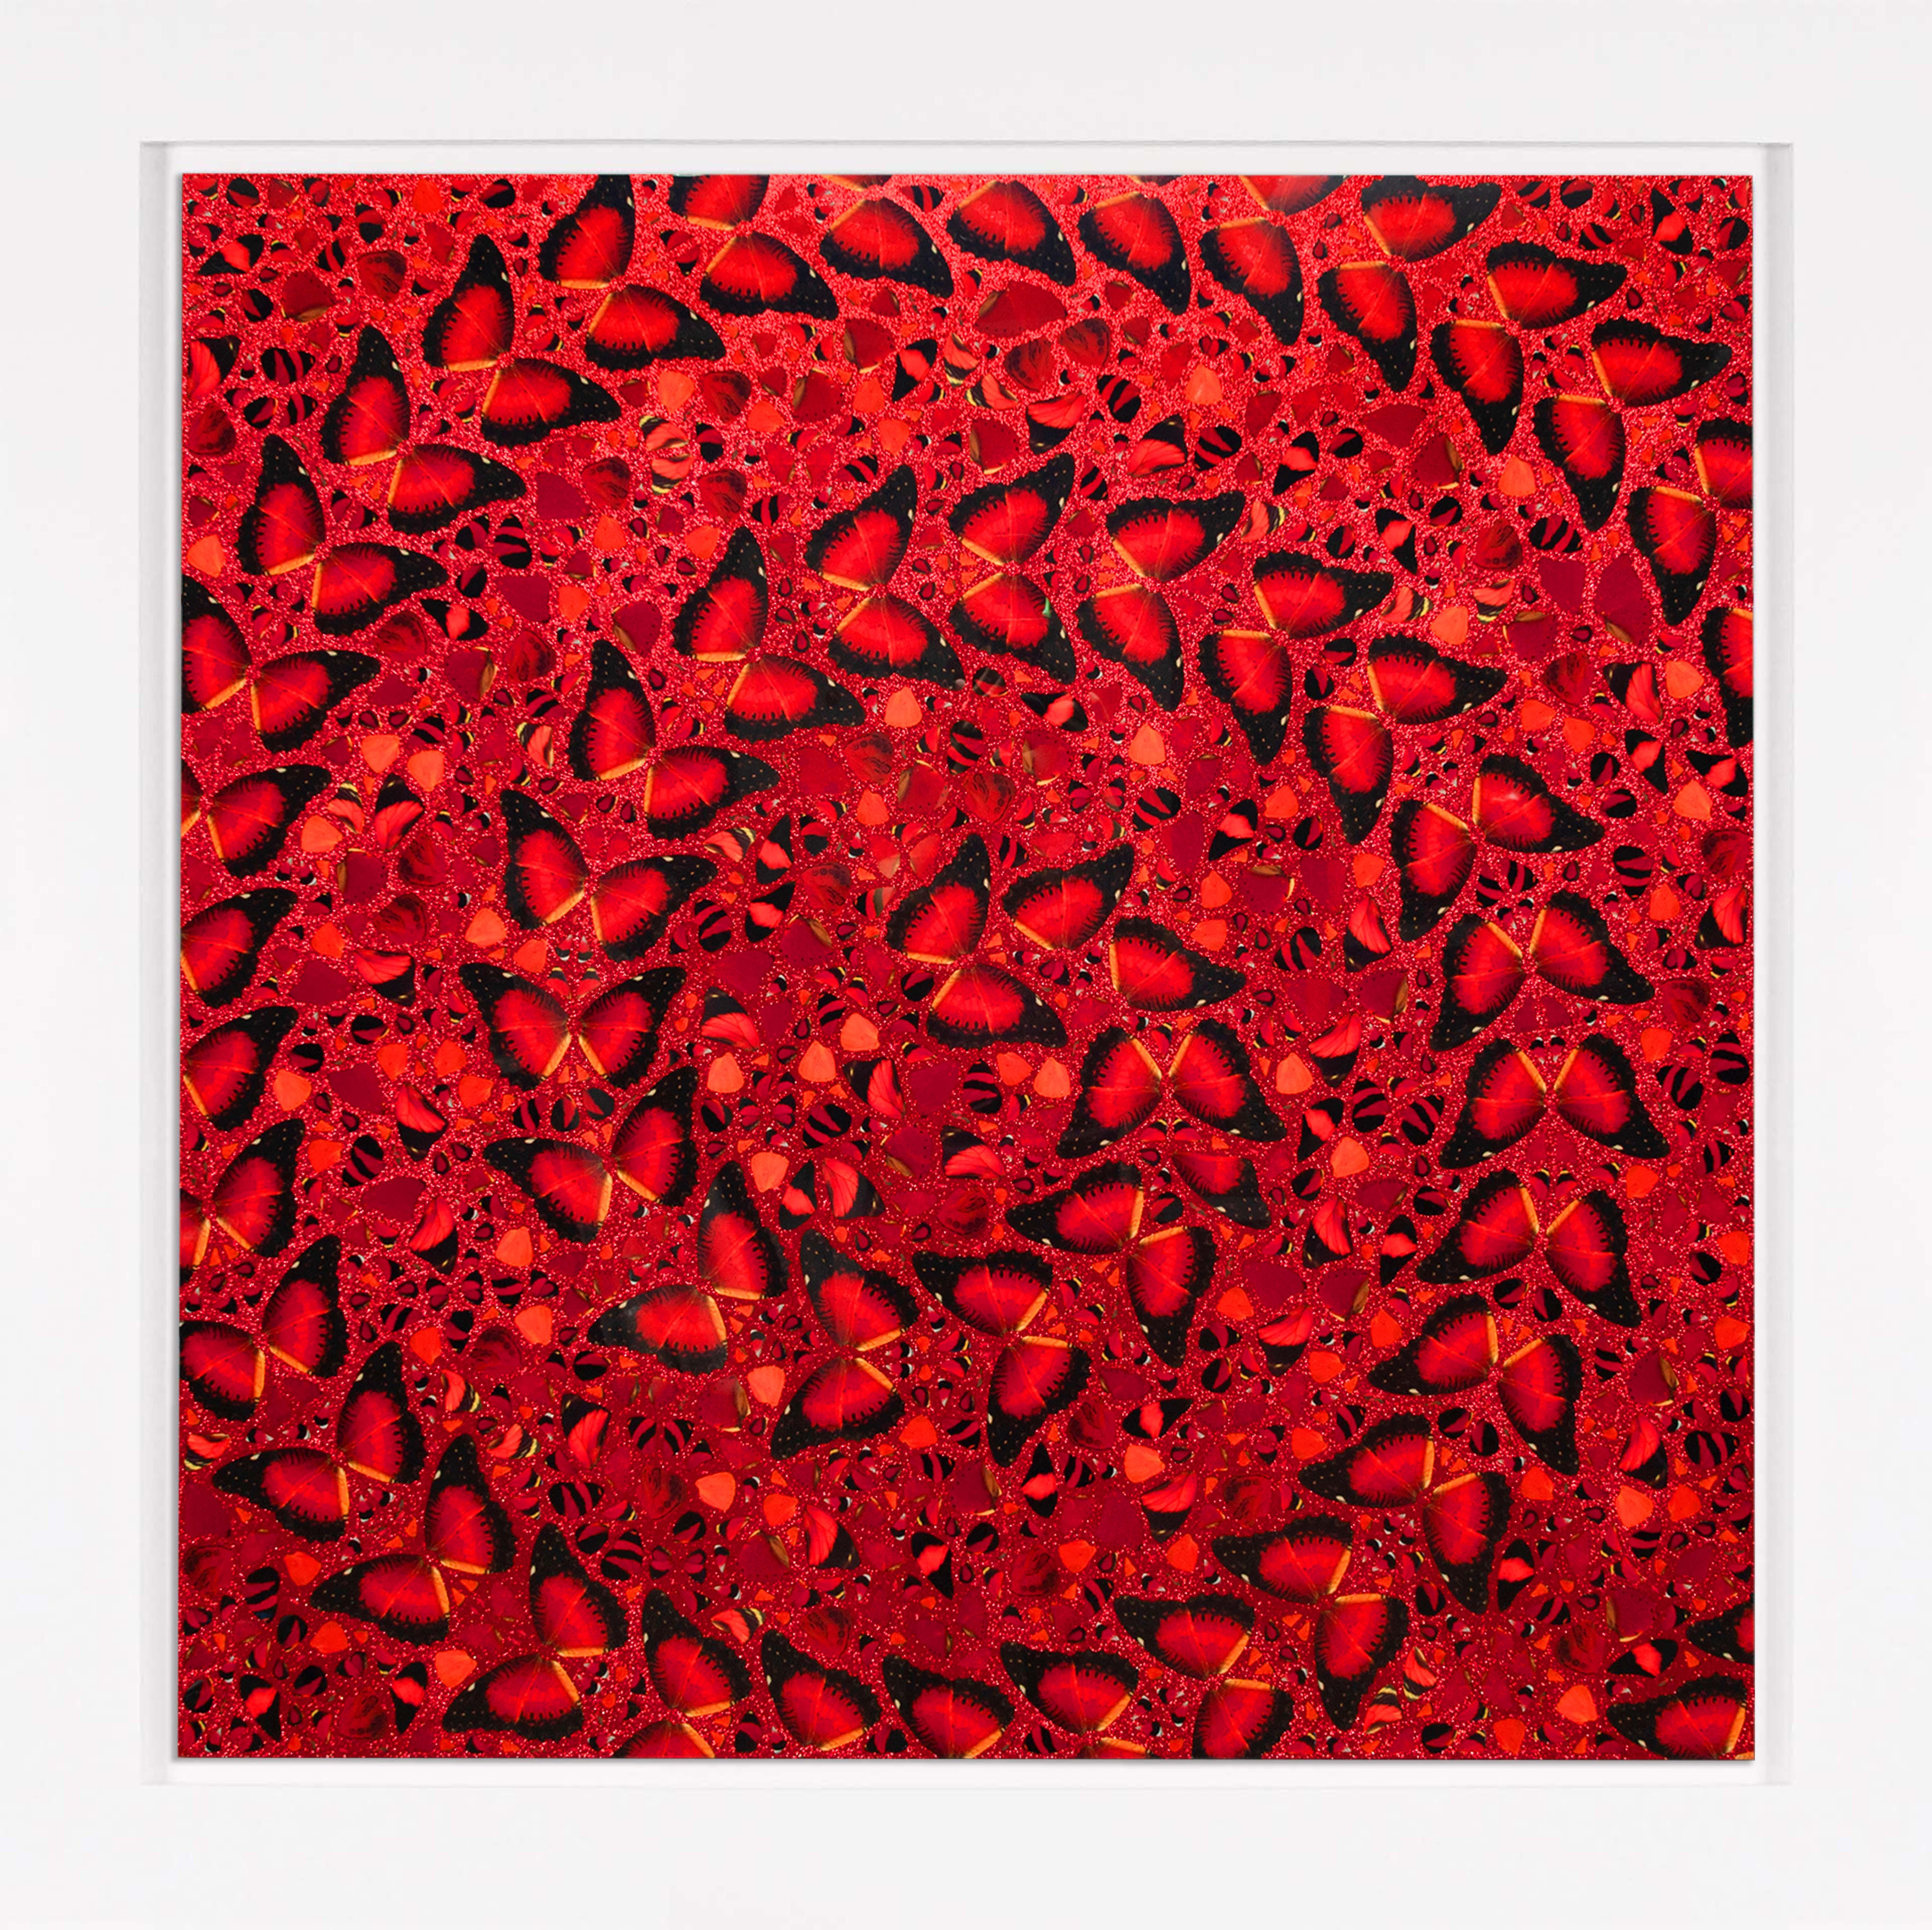 Damien Hirst’s ‘Taytu Betul’ is laminated giclée print on aluminum composite panel with glittering diamond dust. It is one in a series of five mesmerizing prints in ‘The Empresses’ series. ‘Taytu Betul’ is named after the fierce empress of Ethiopia.